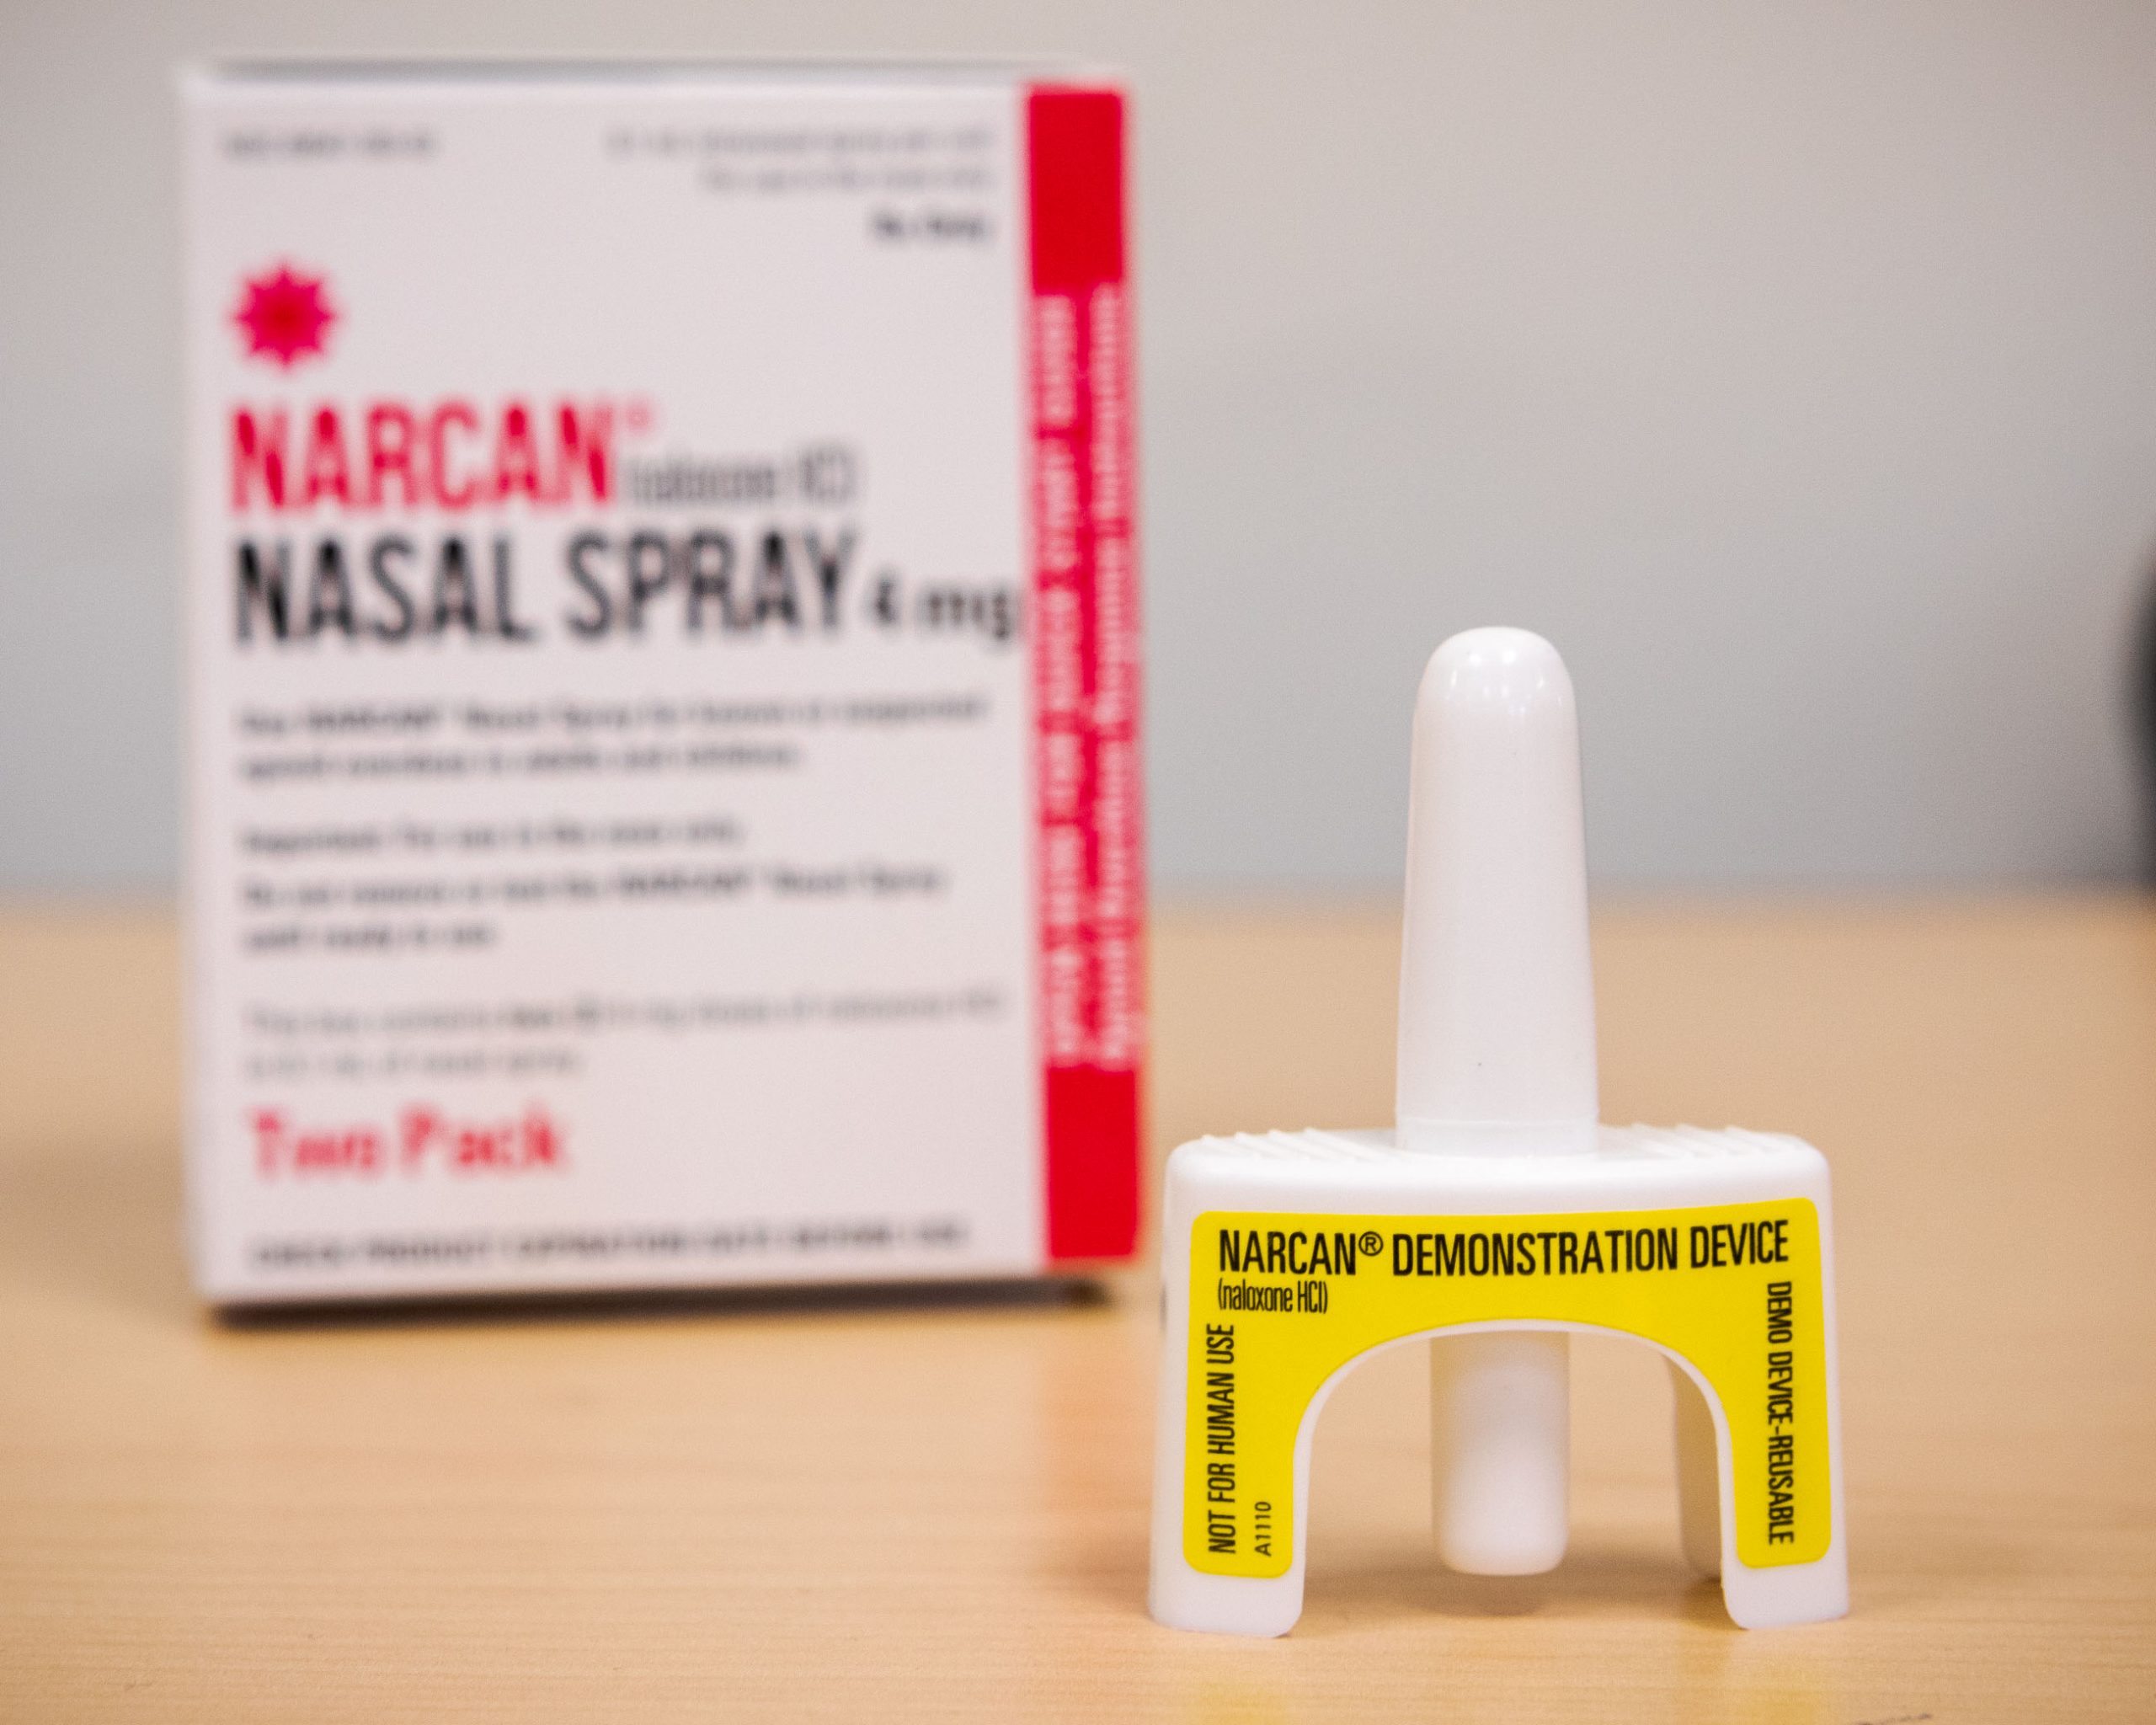 Narcan nasal spray. (CC BY 2.0. https://creativecommons.org/licenses/by/2.0/